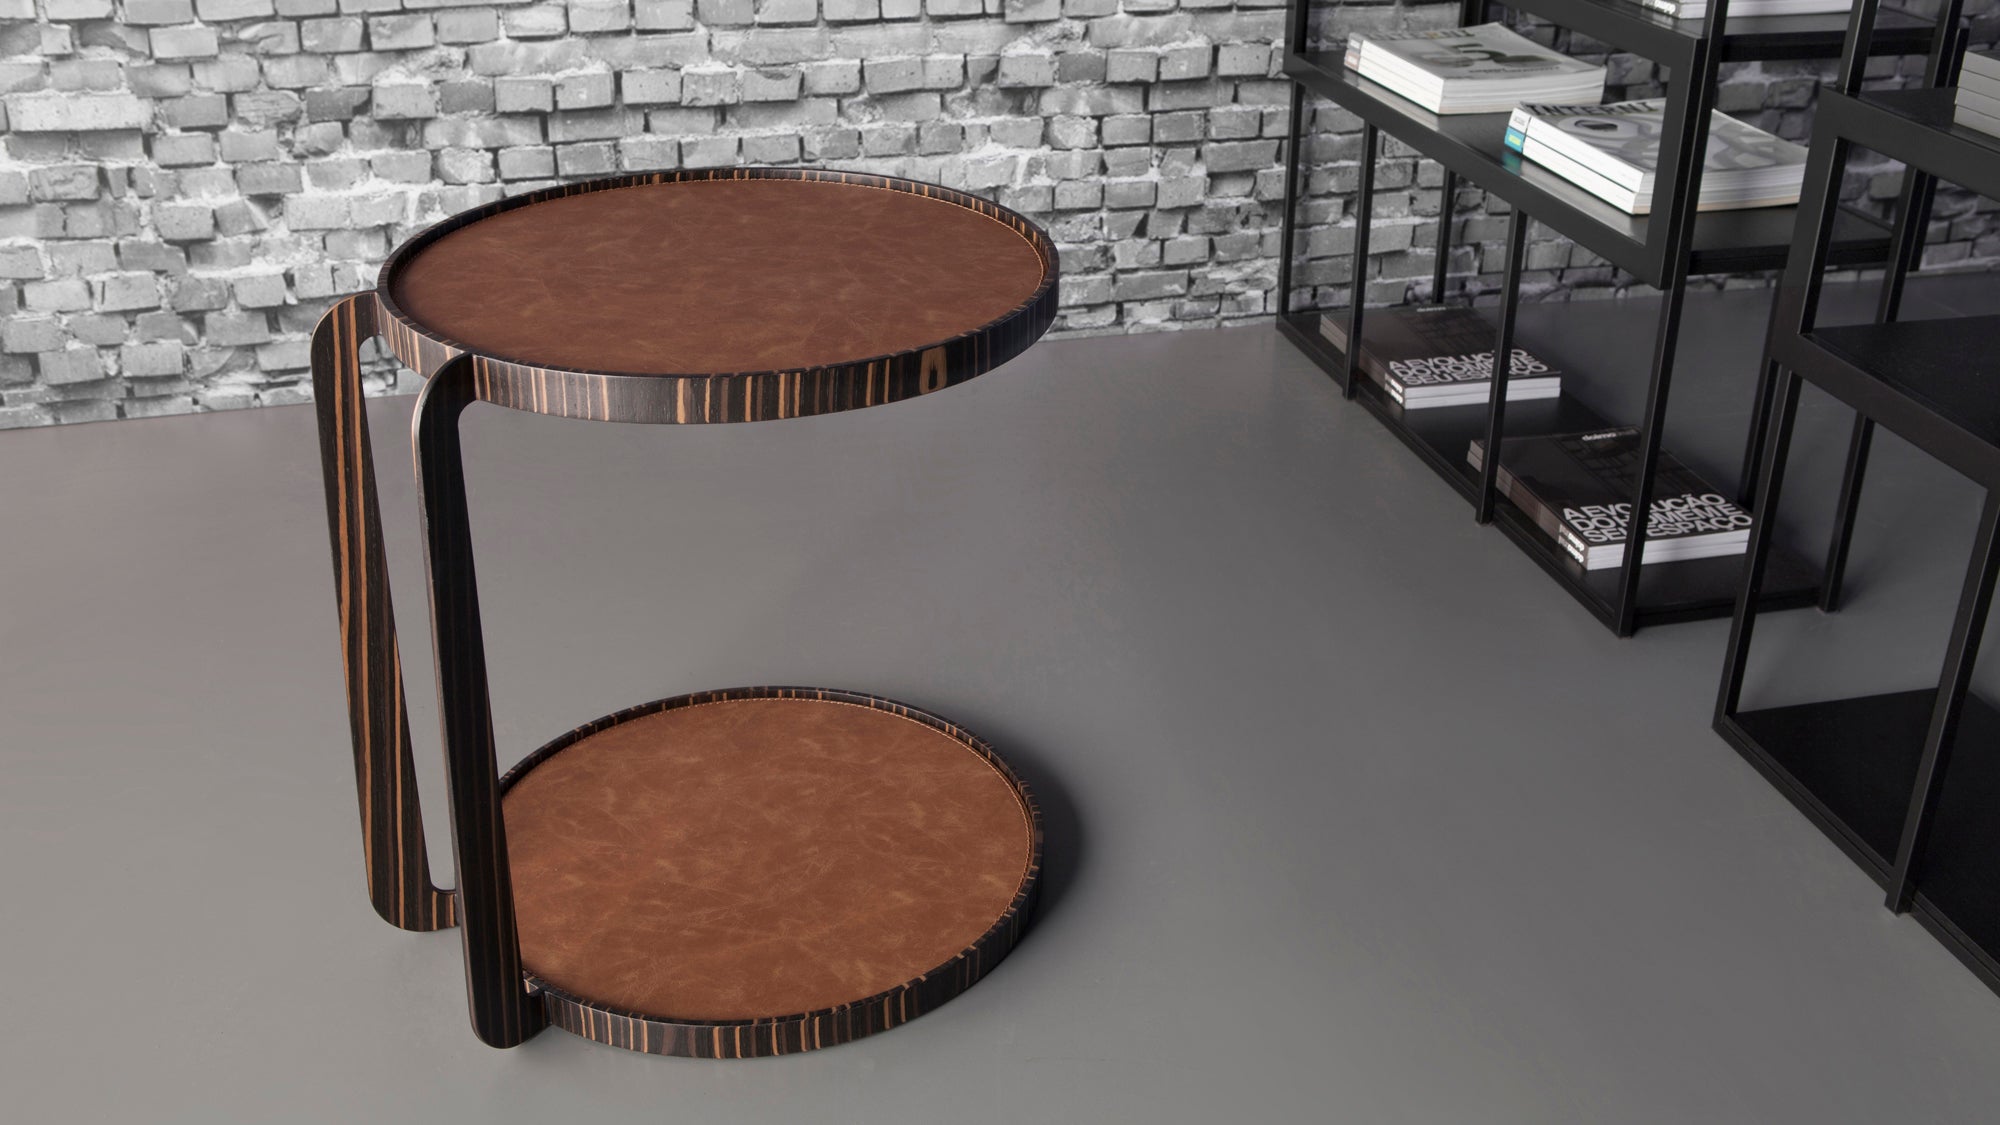 Pro Side Table by Doimo Brasil
Dimensions:  D 50 x H 55 cm 
Materials: Base: Veneer, Top Inferior: aged/crocco reconst. leather, Top: aged/crocco reconst. leather. 


With the intention of providing good taste and personality, Doimo deciphers trends